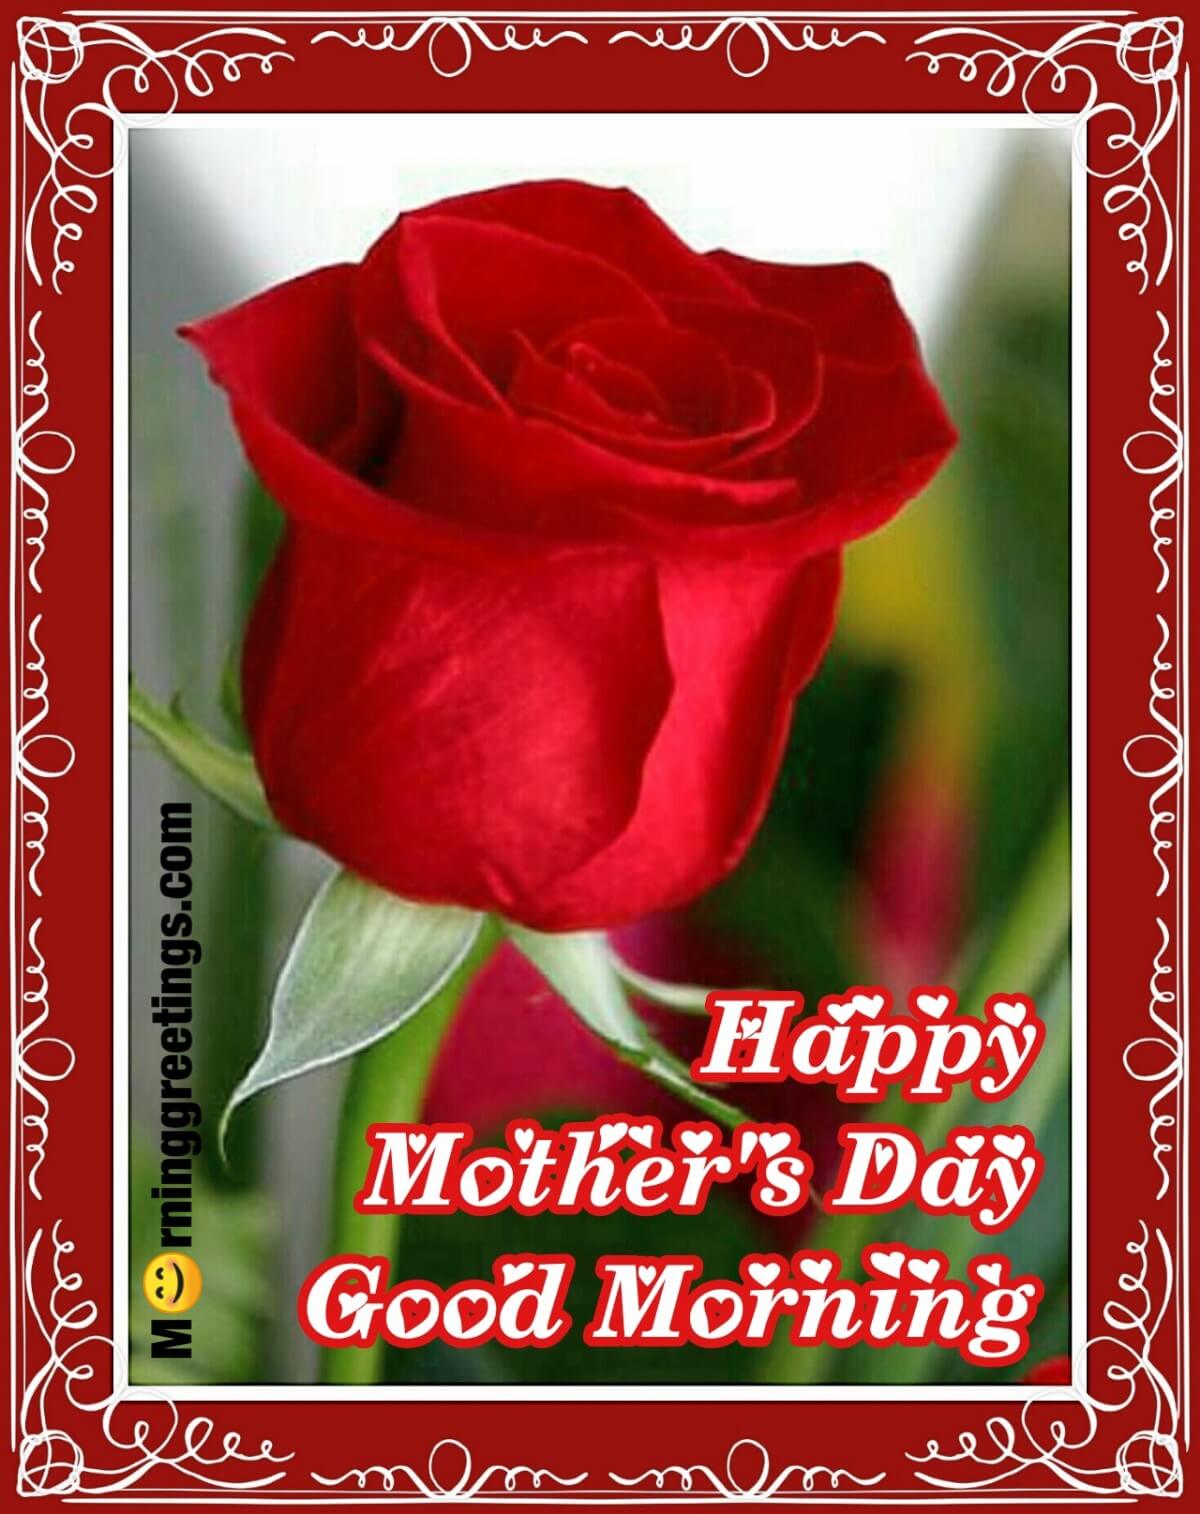 Happy Mother’s Day Good Morning